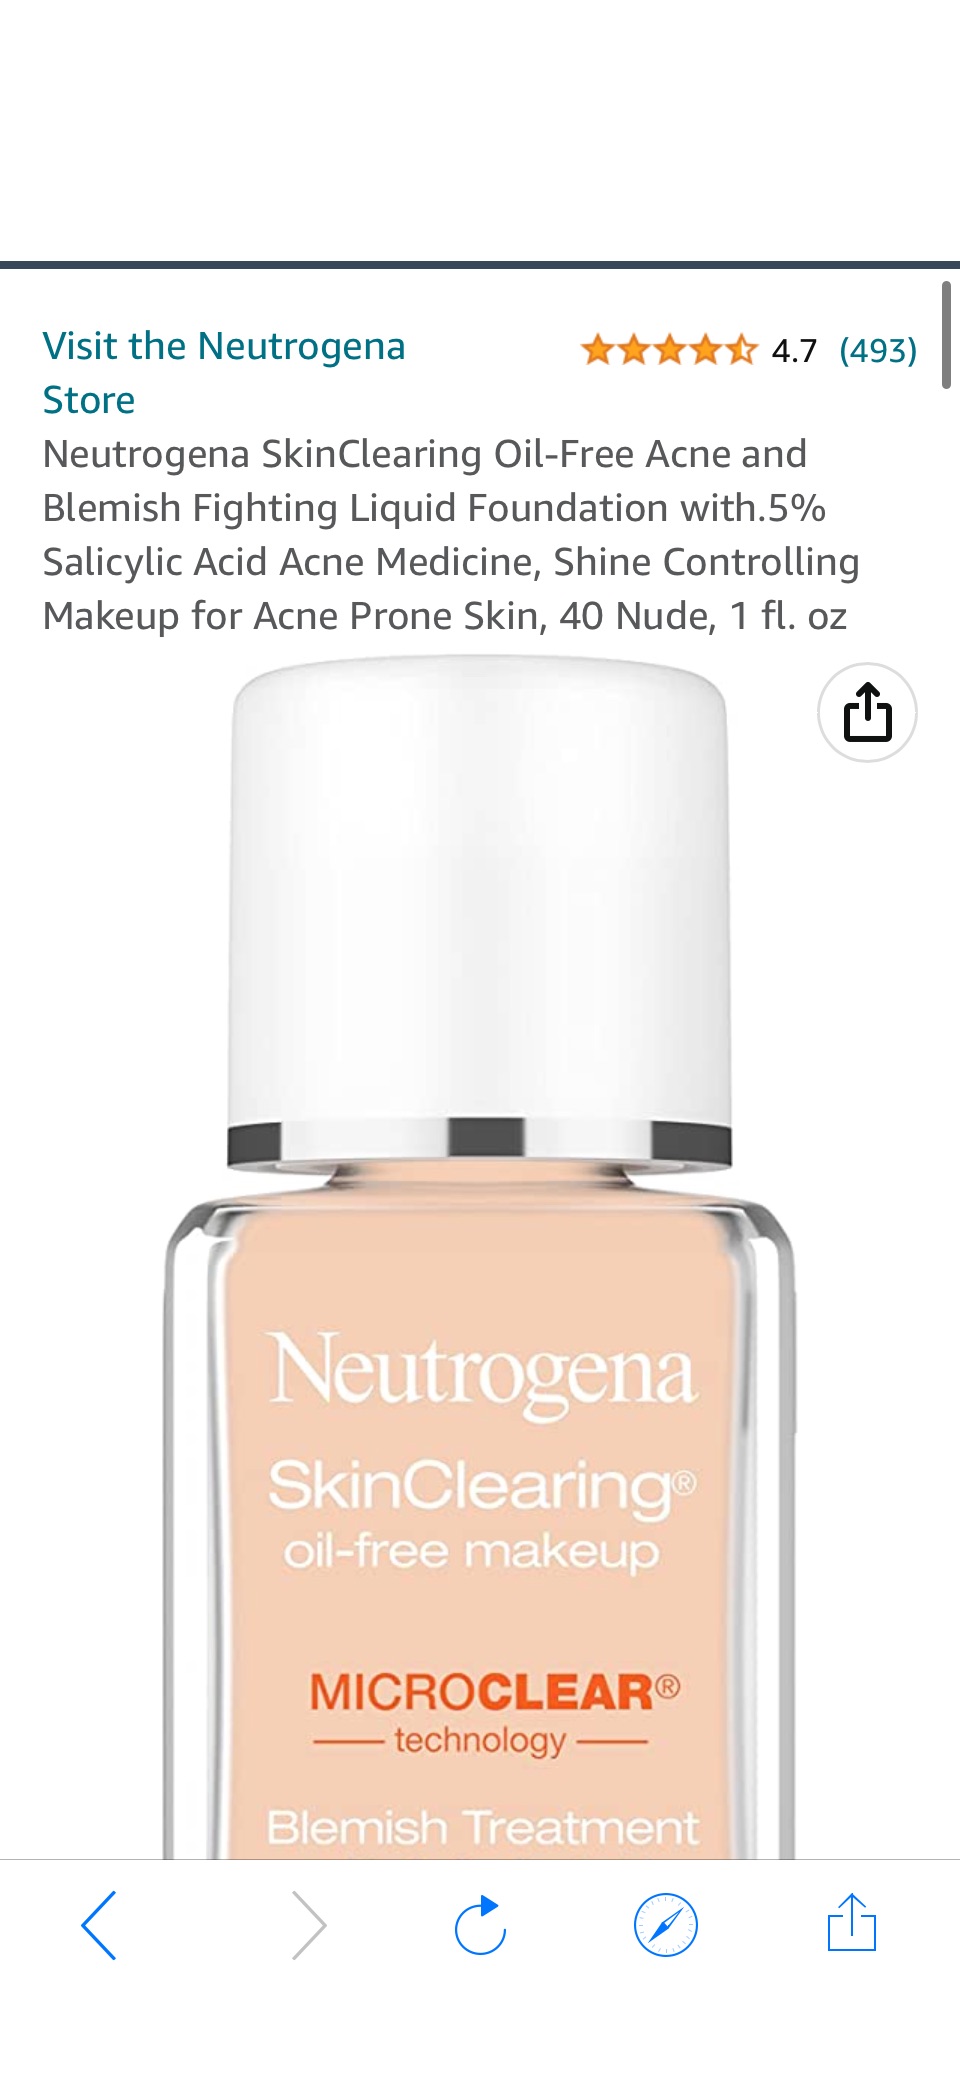 Amazon.com : Neutrogena SkinClearing Oil-Free Acne and Blemish Fighting Liquid Foundation with.5% Salicylic Acid Acne Medicine, Shine Controlling Makeup for Acne Prone Skin, 40 Nude